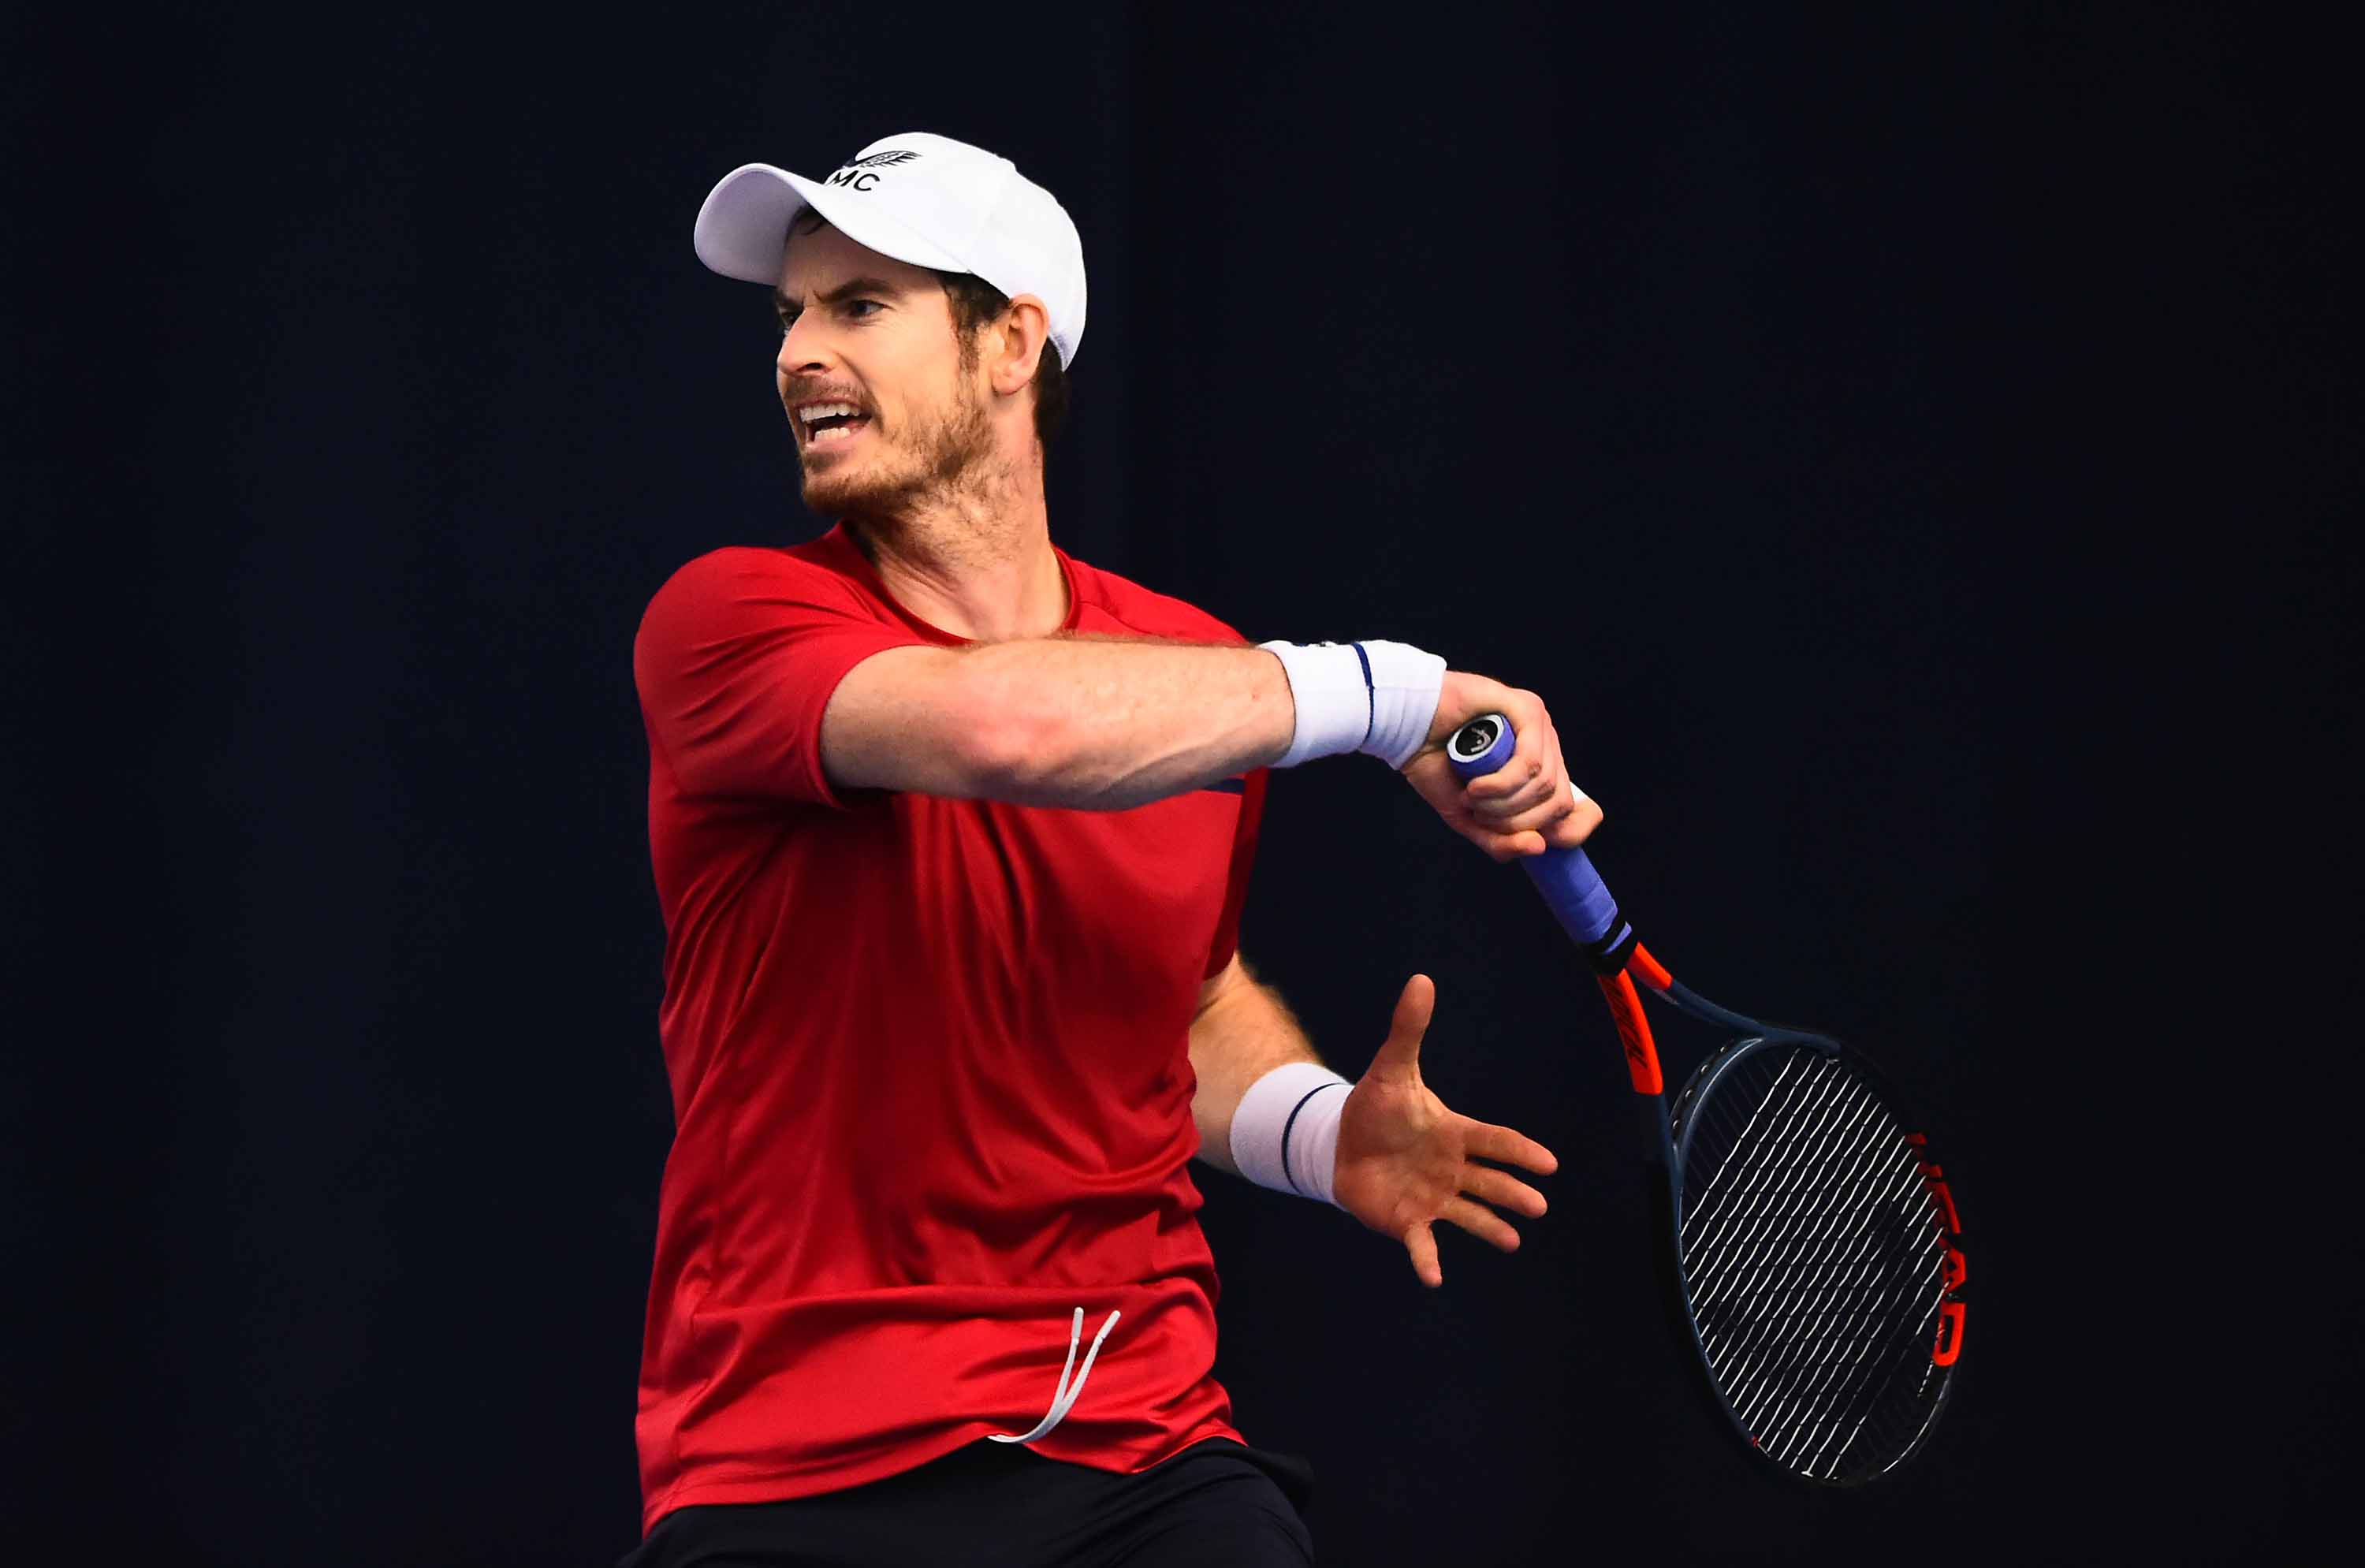 Andy Murray plays a match during the Battle of the Brits Premier League of Tennis in London, on December 20, 2020.